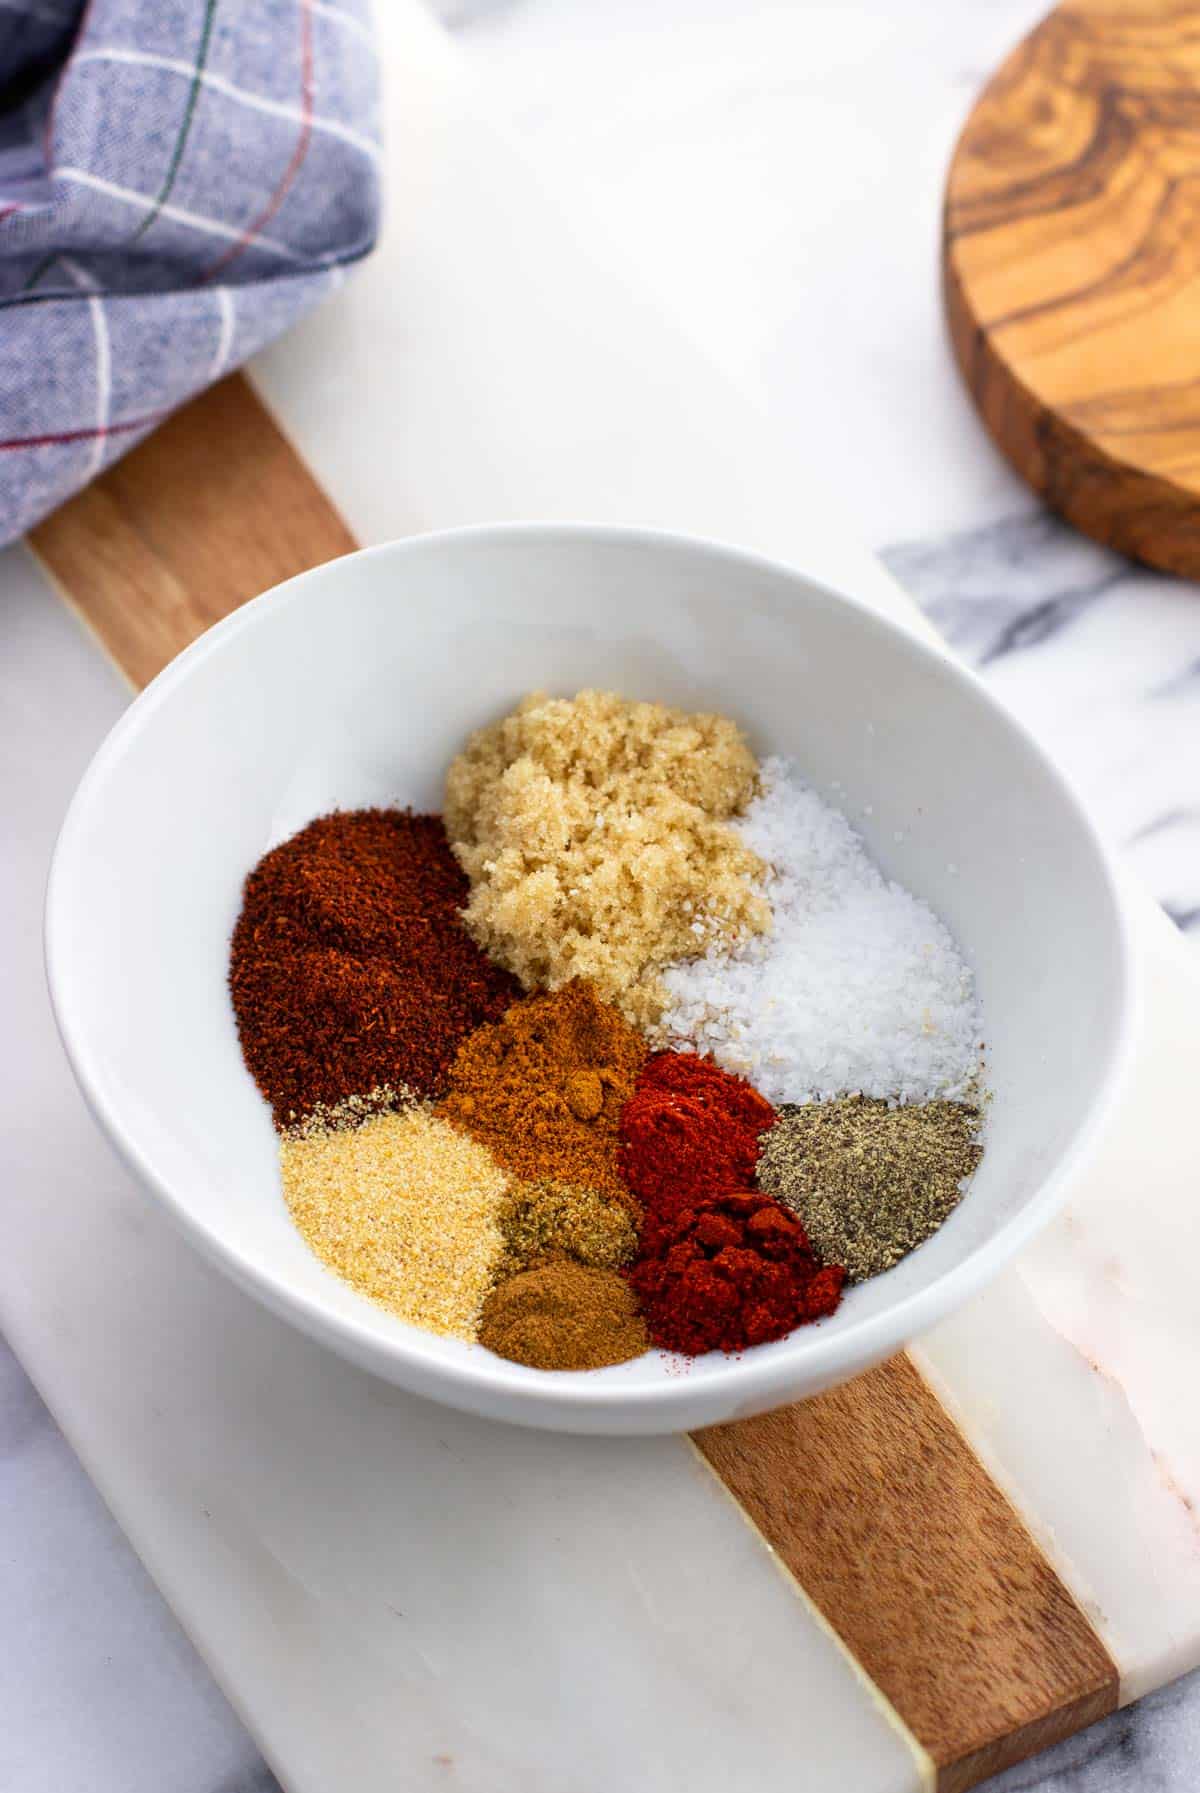 Spice rub ingredients separated in a bowl.